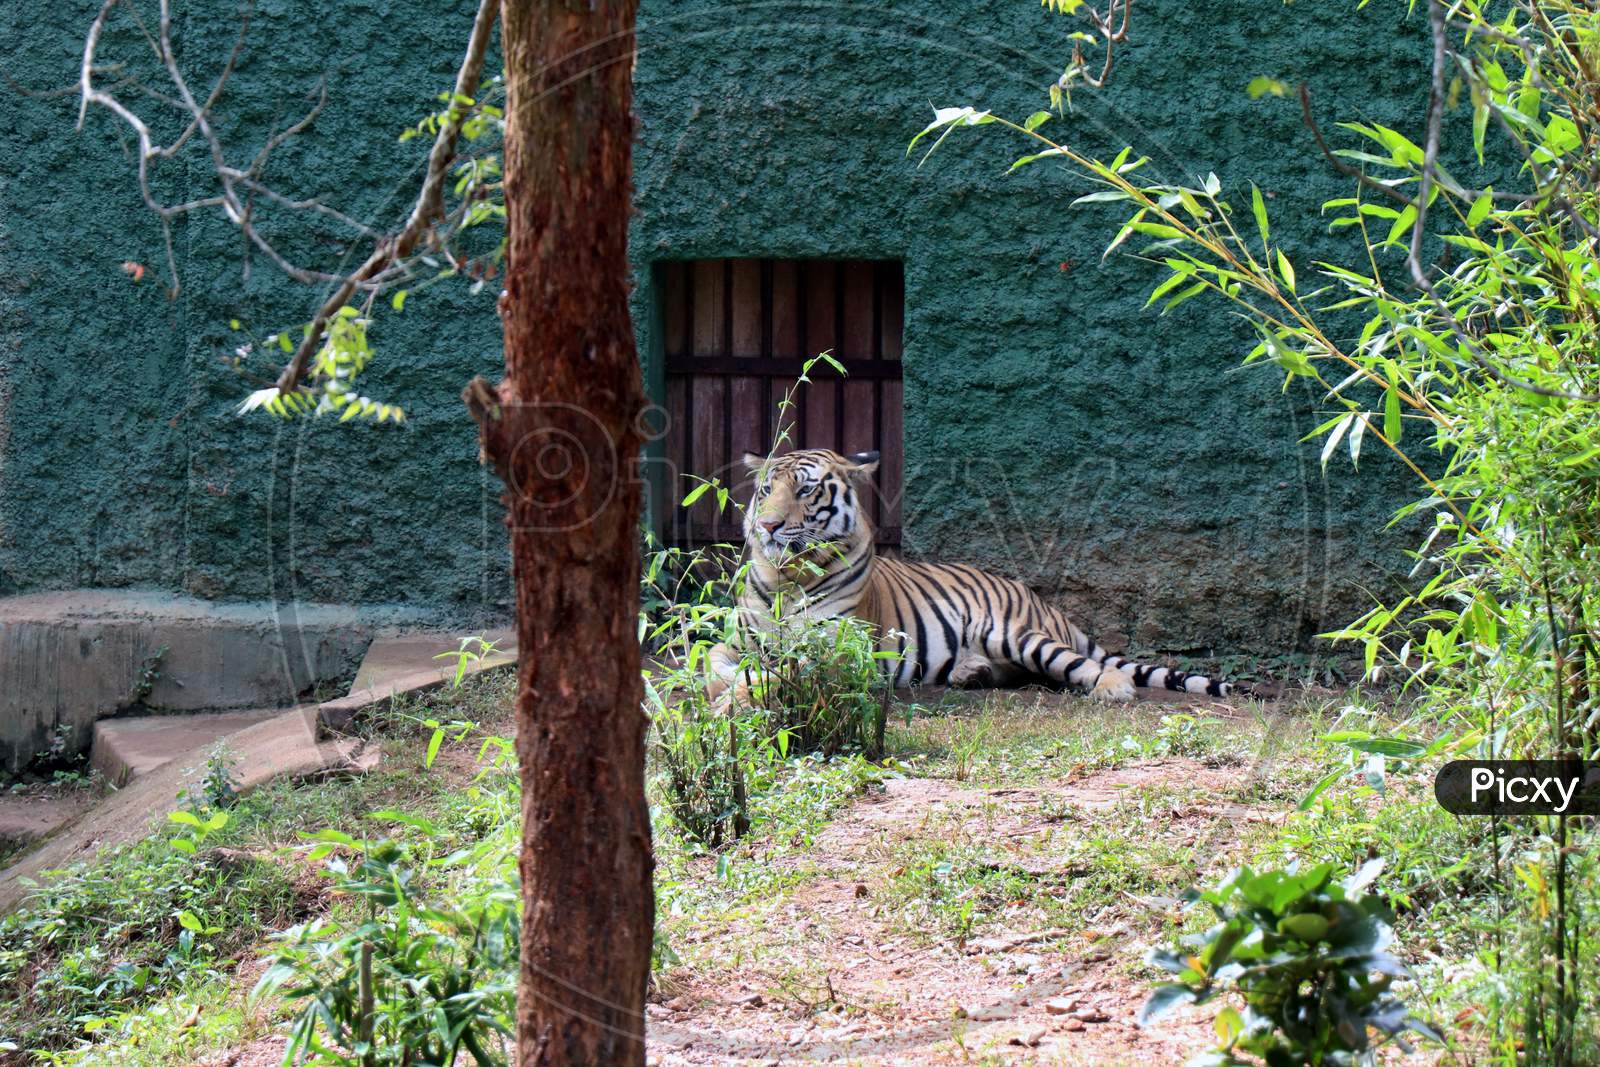 Tiger photographed in the Zoo. Nandankanan Zoological Park